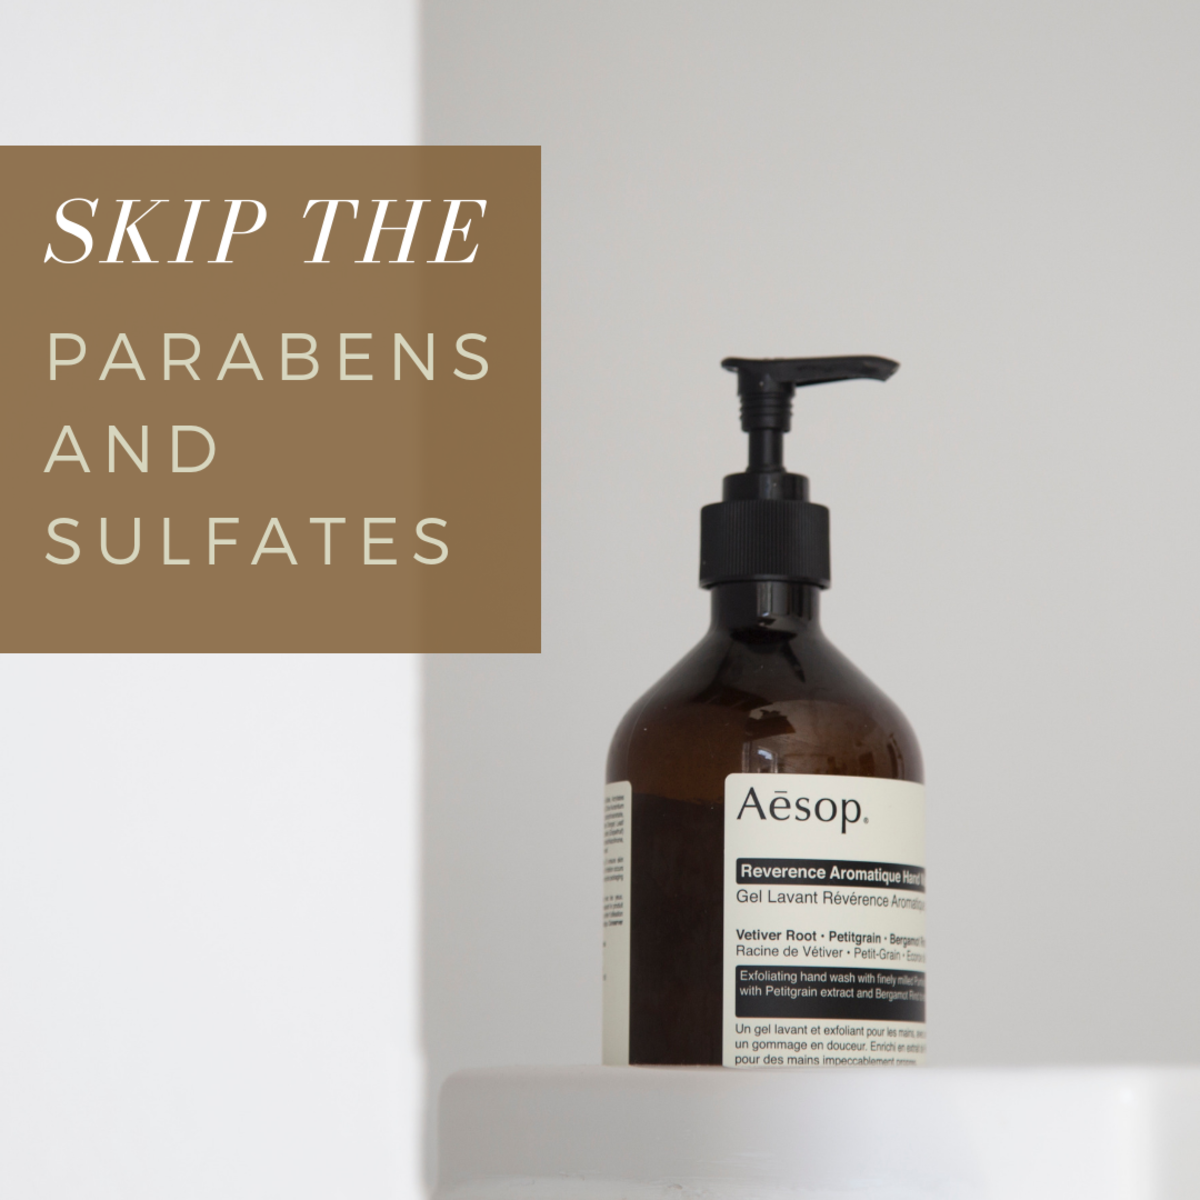 Parabens and sulfates damage hair and wreak havoc in the body.